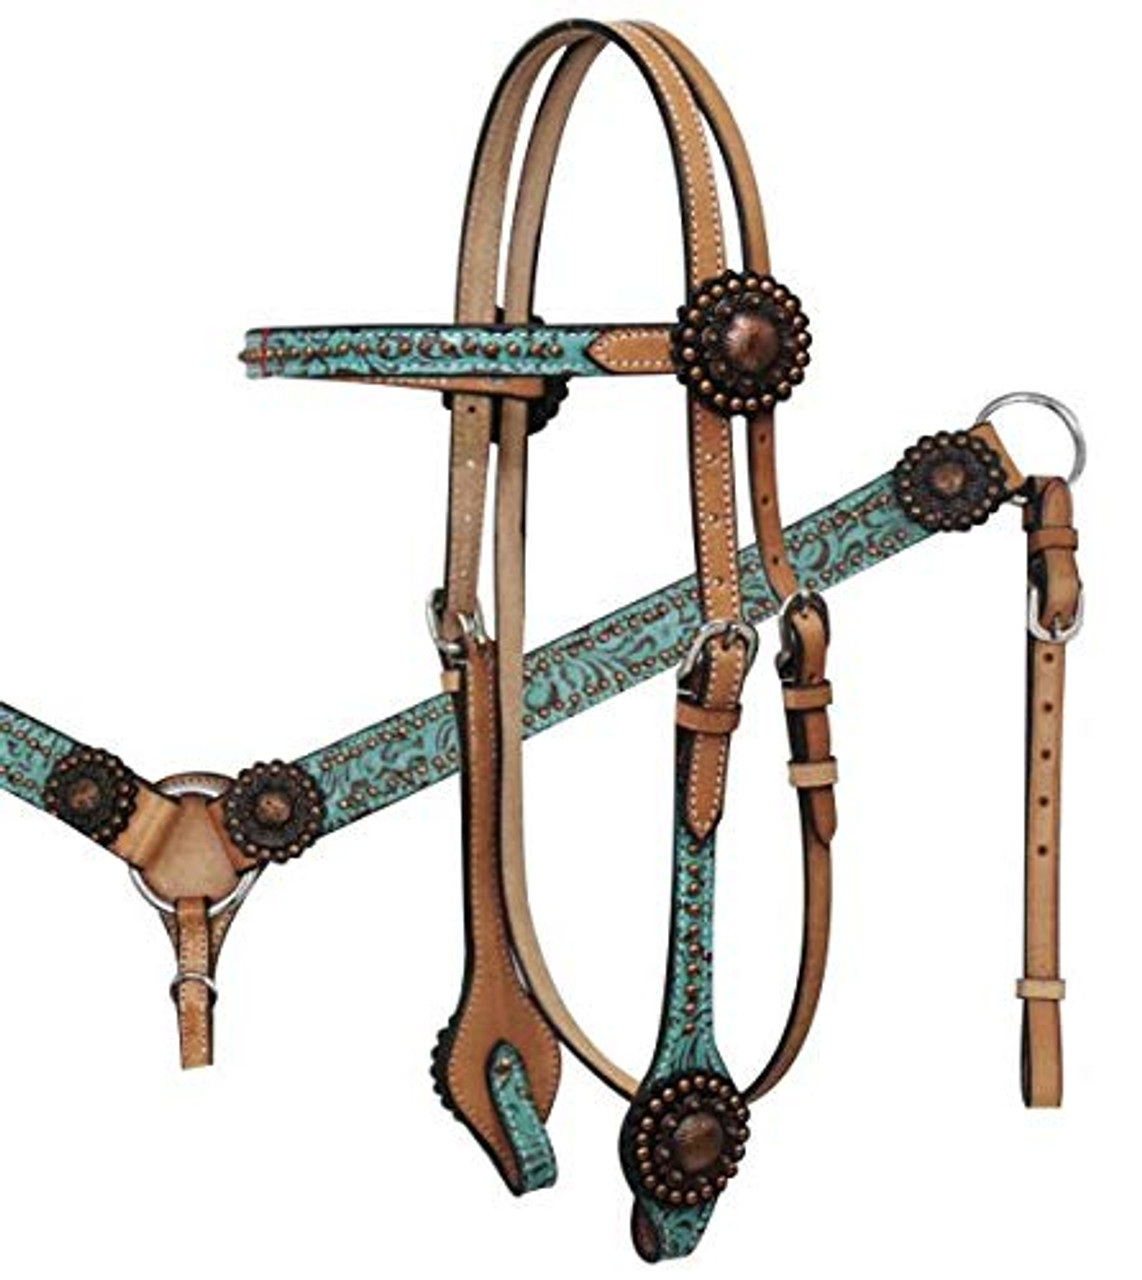 Showman ® Belt Halter with Rodeo Conchos and Buckles. – Dark Horse Tack  Company